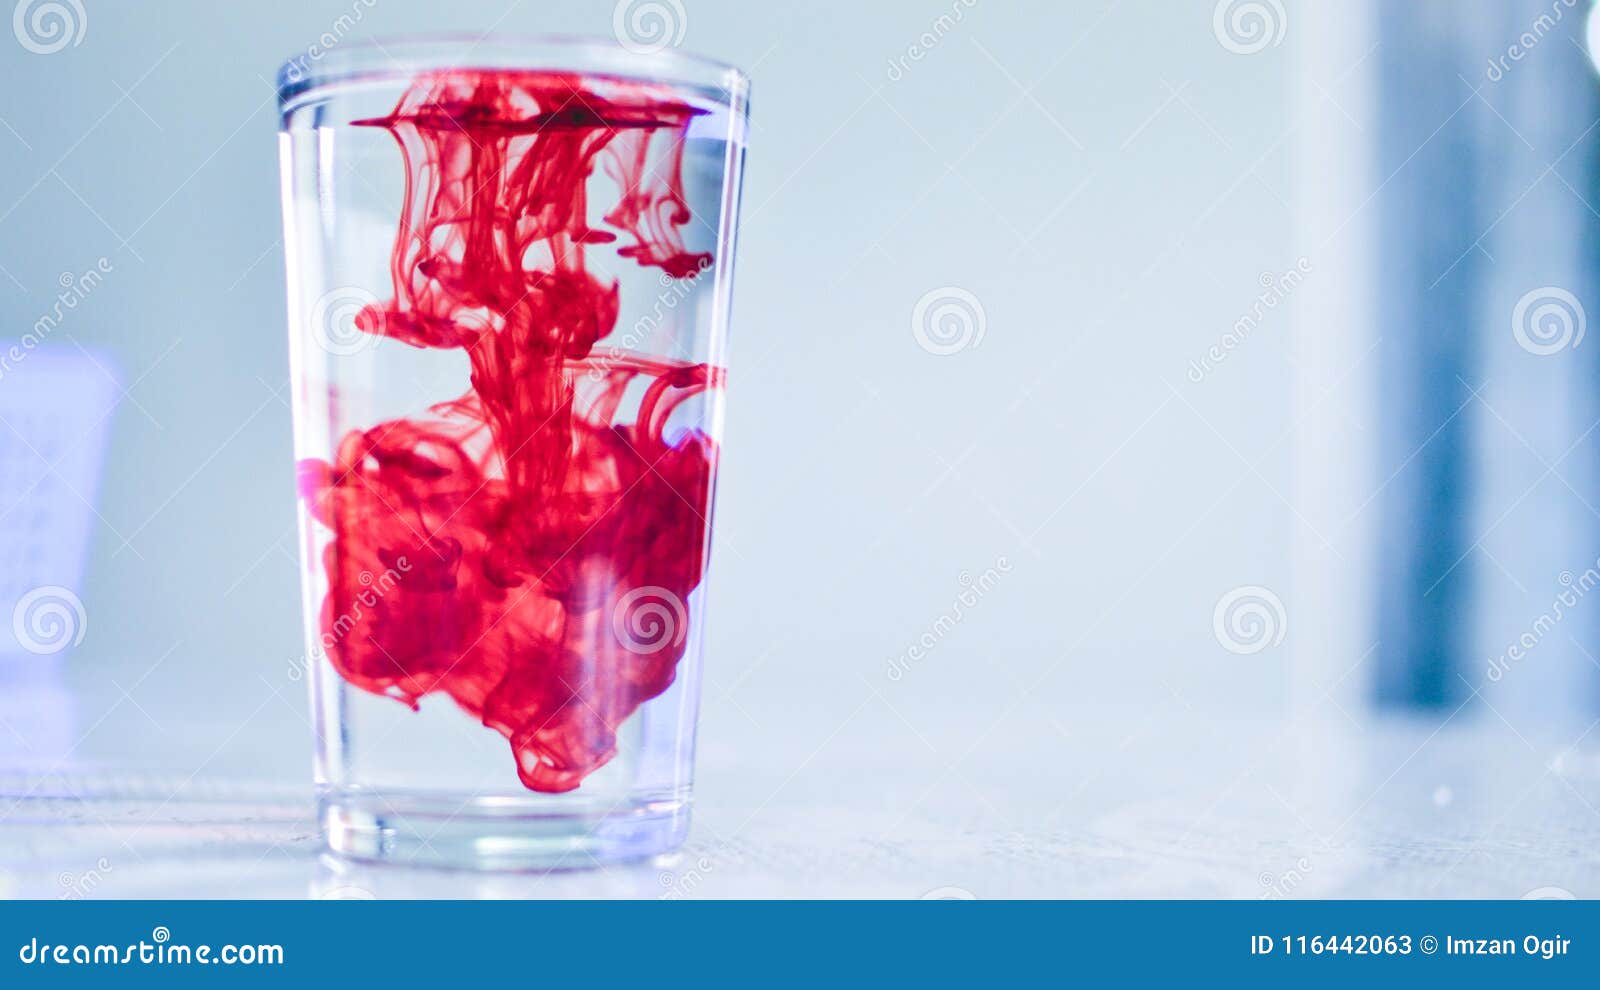 red dye in crystal clear water or refreshing drink